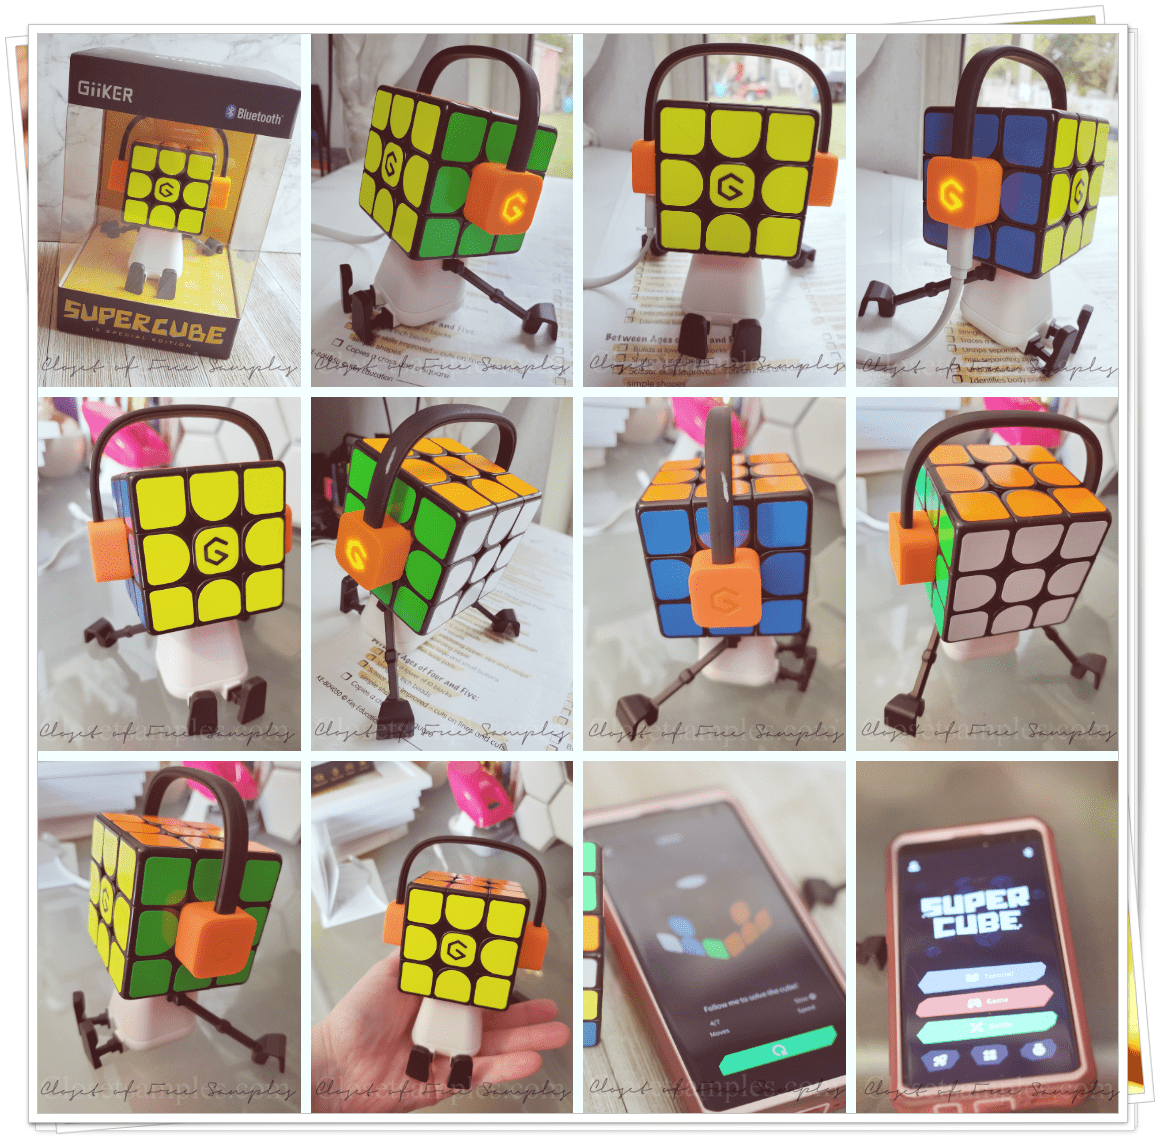 Giiker-Connected-Electronic-Bluetooth-Rubiks-Cube-Review-closetsamples.png